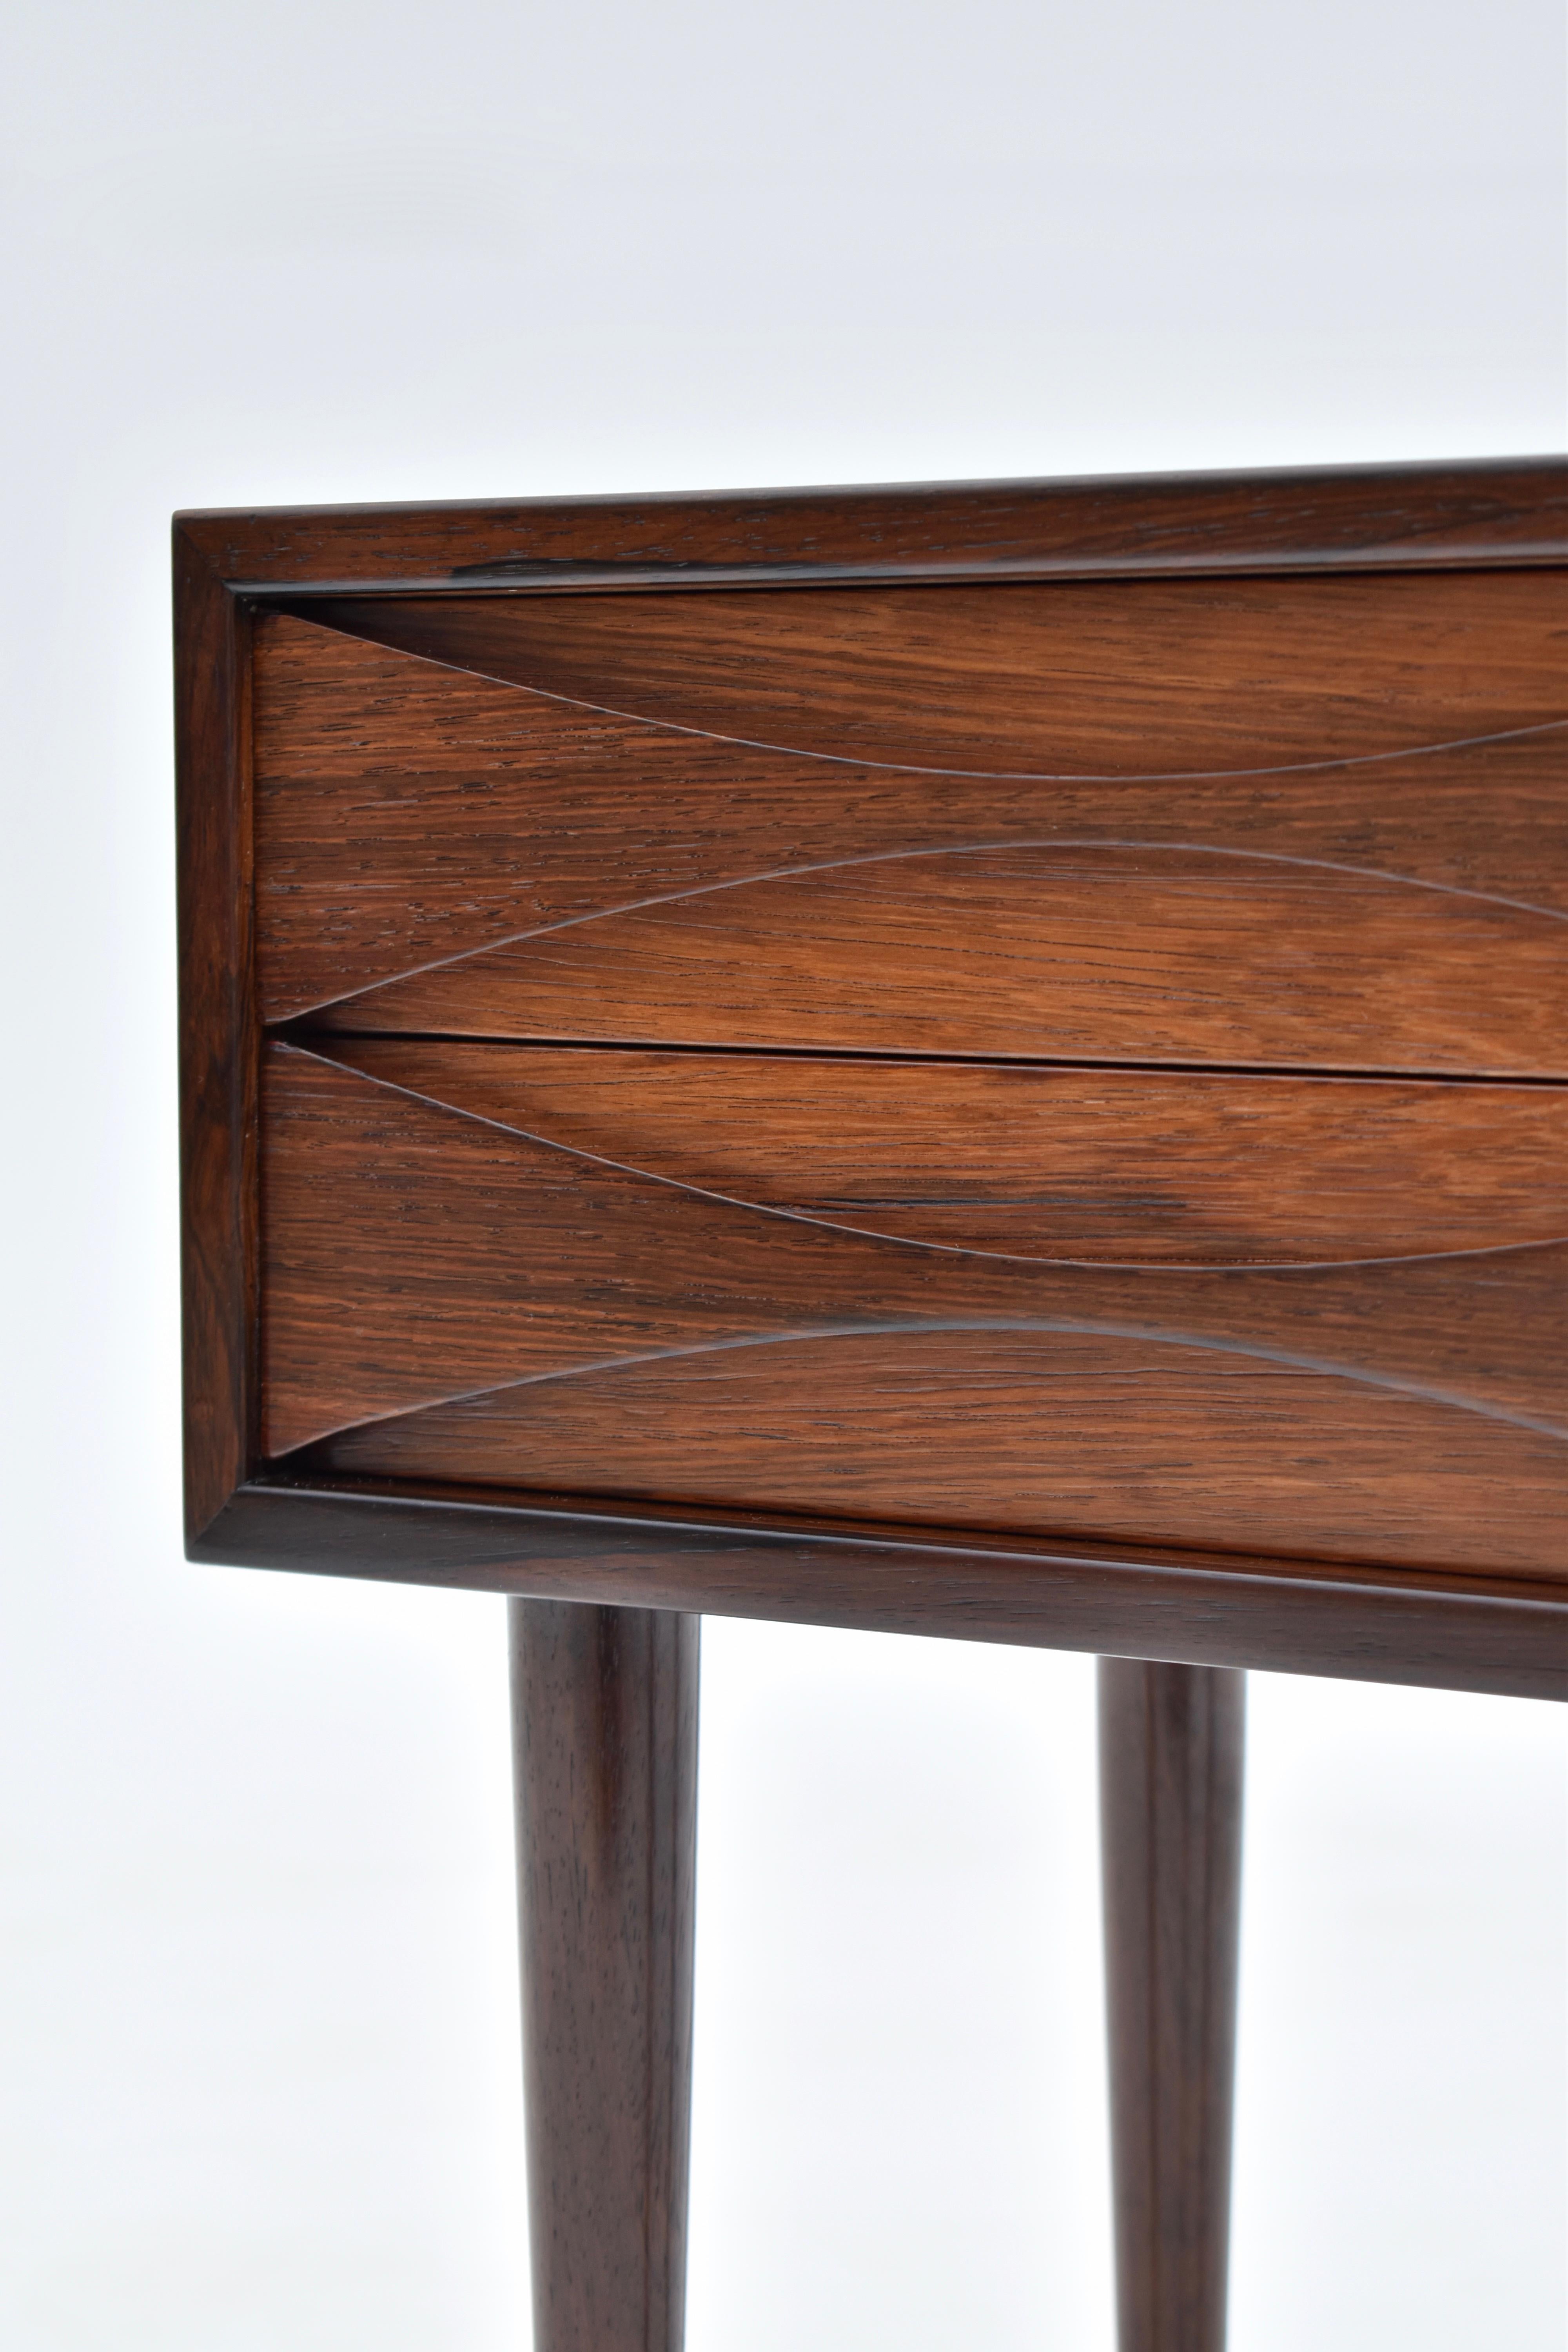 Niels Clausen Rosewood Chest of Drawers for N.C Mobler 6